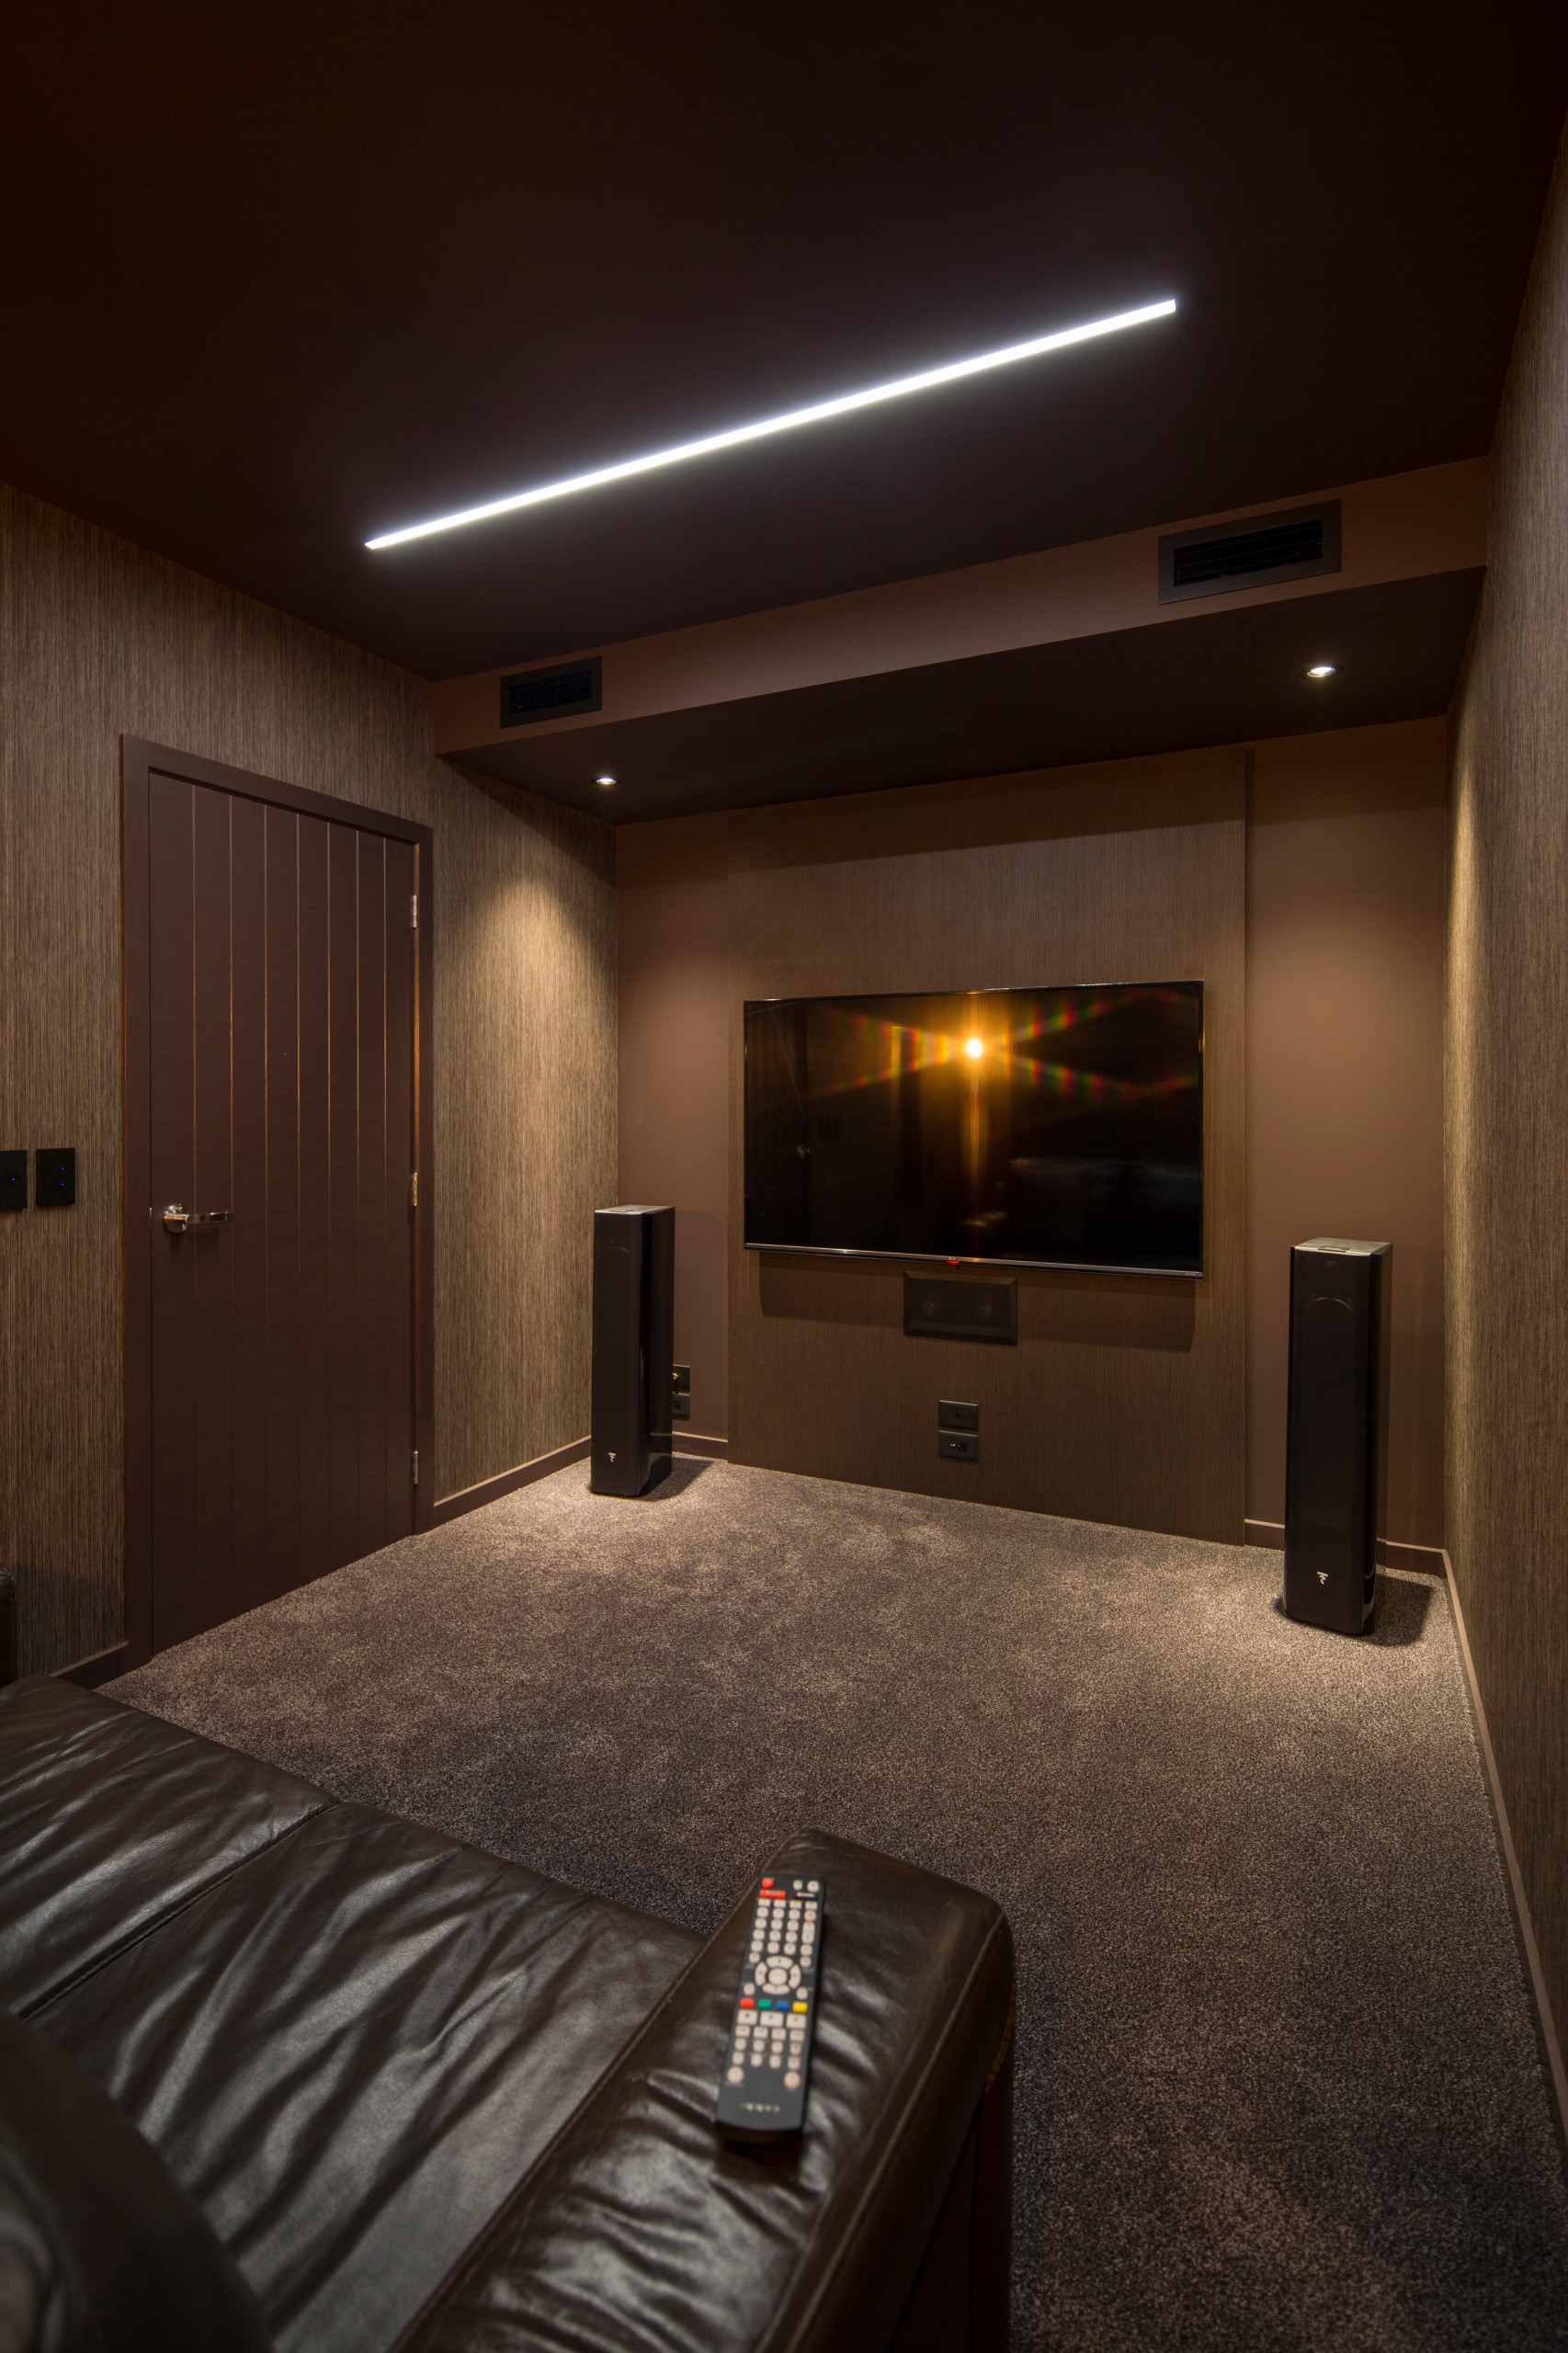 75 Beautiful Small Home Theater Pictures & Ideas | Houzz